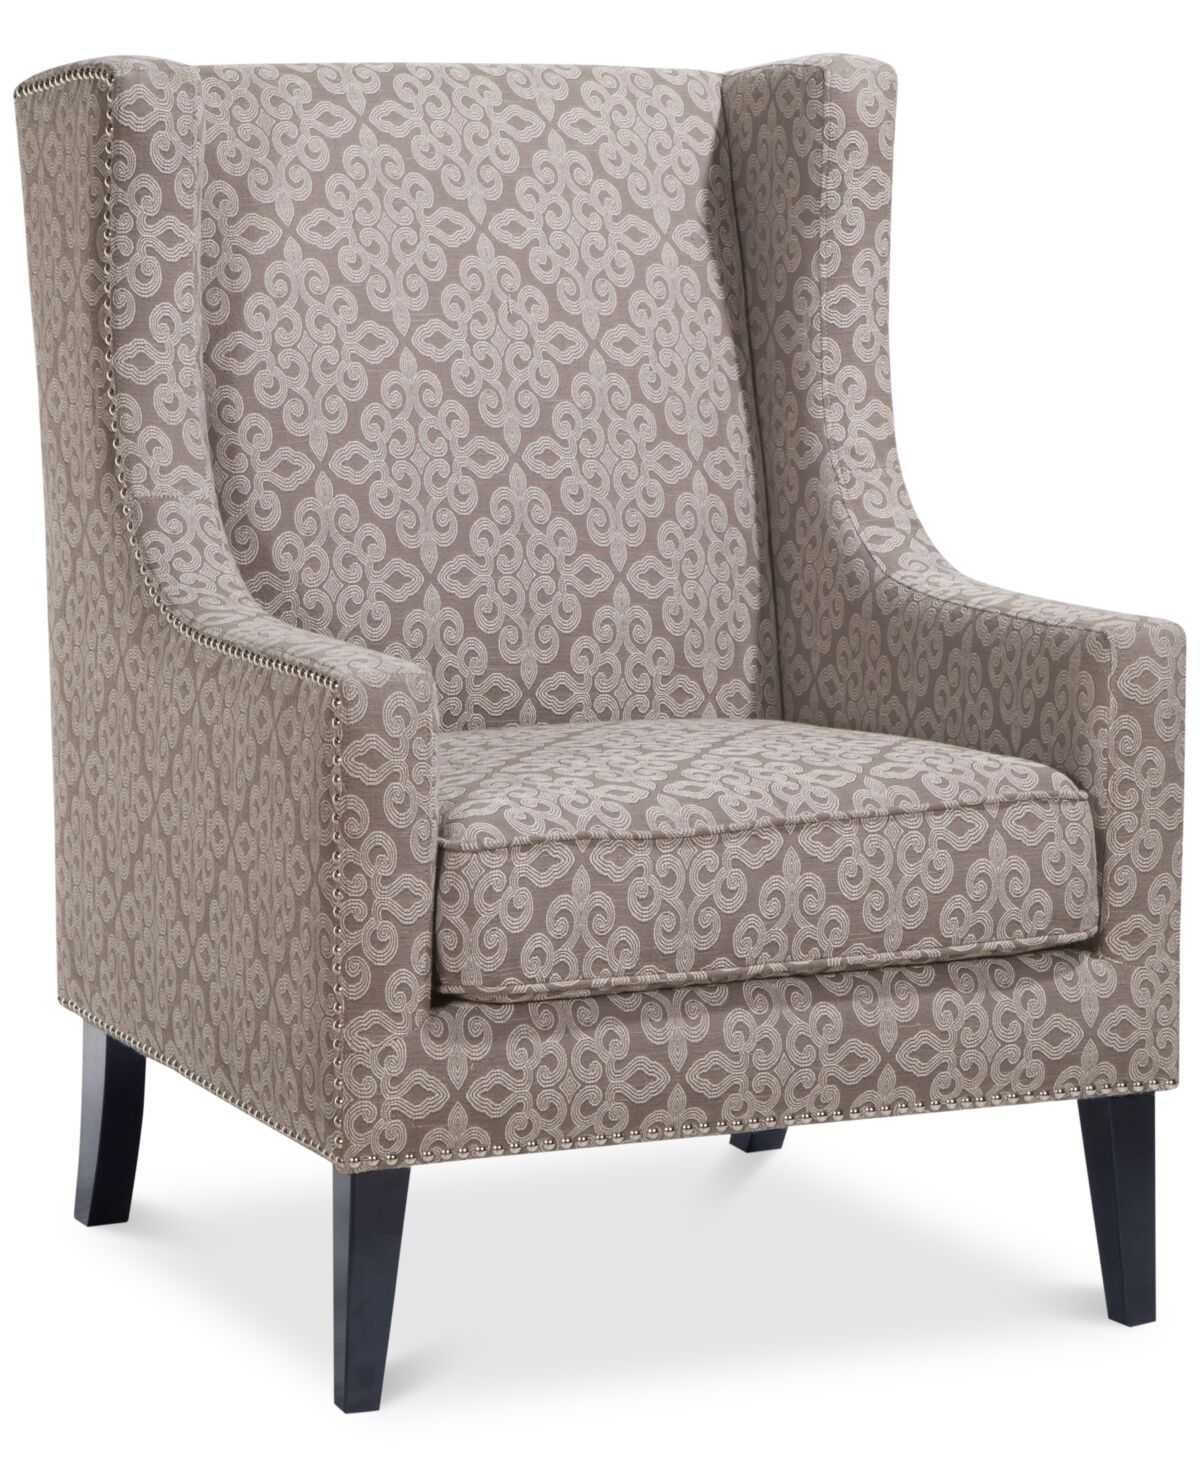 Madison Park Barton Fabric Accent Chair with Nailheads - Beige Lace Print